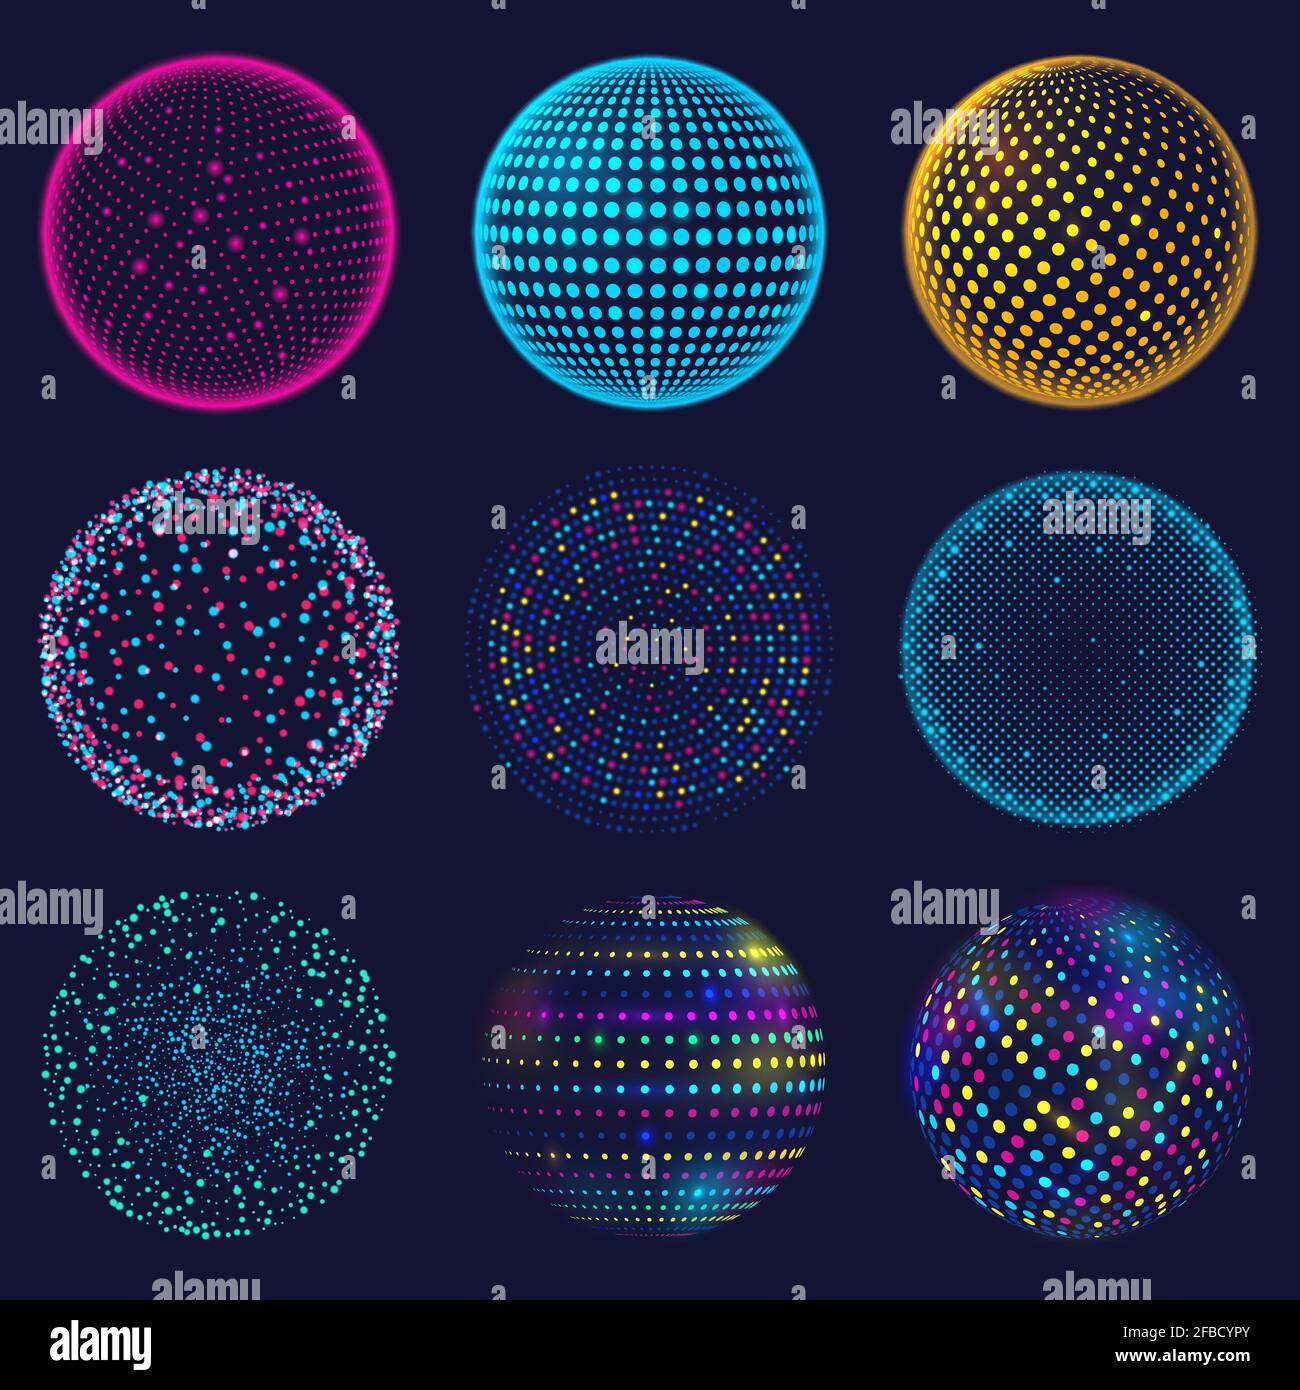 Dotted neon 3d sphere. Abstract atomic dotted spheres, 3d grid glowing spherical shapes vector illustration set. Digital neon sphere balls Stock Vector